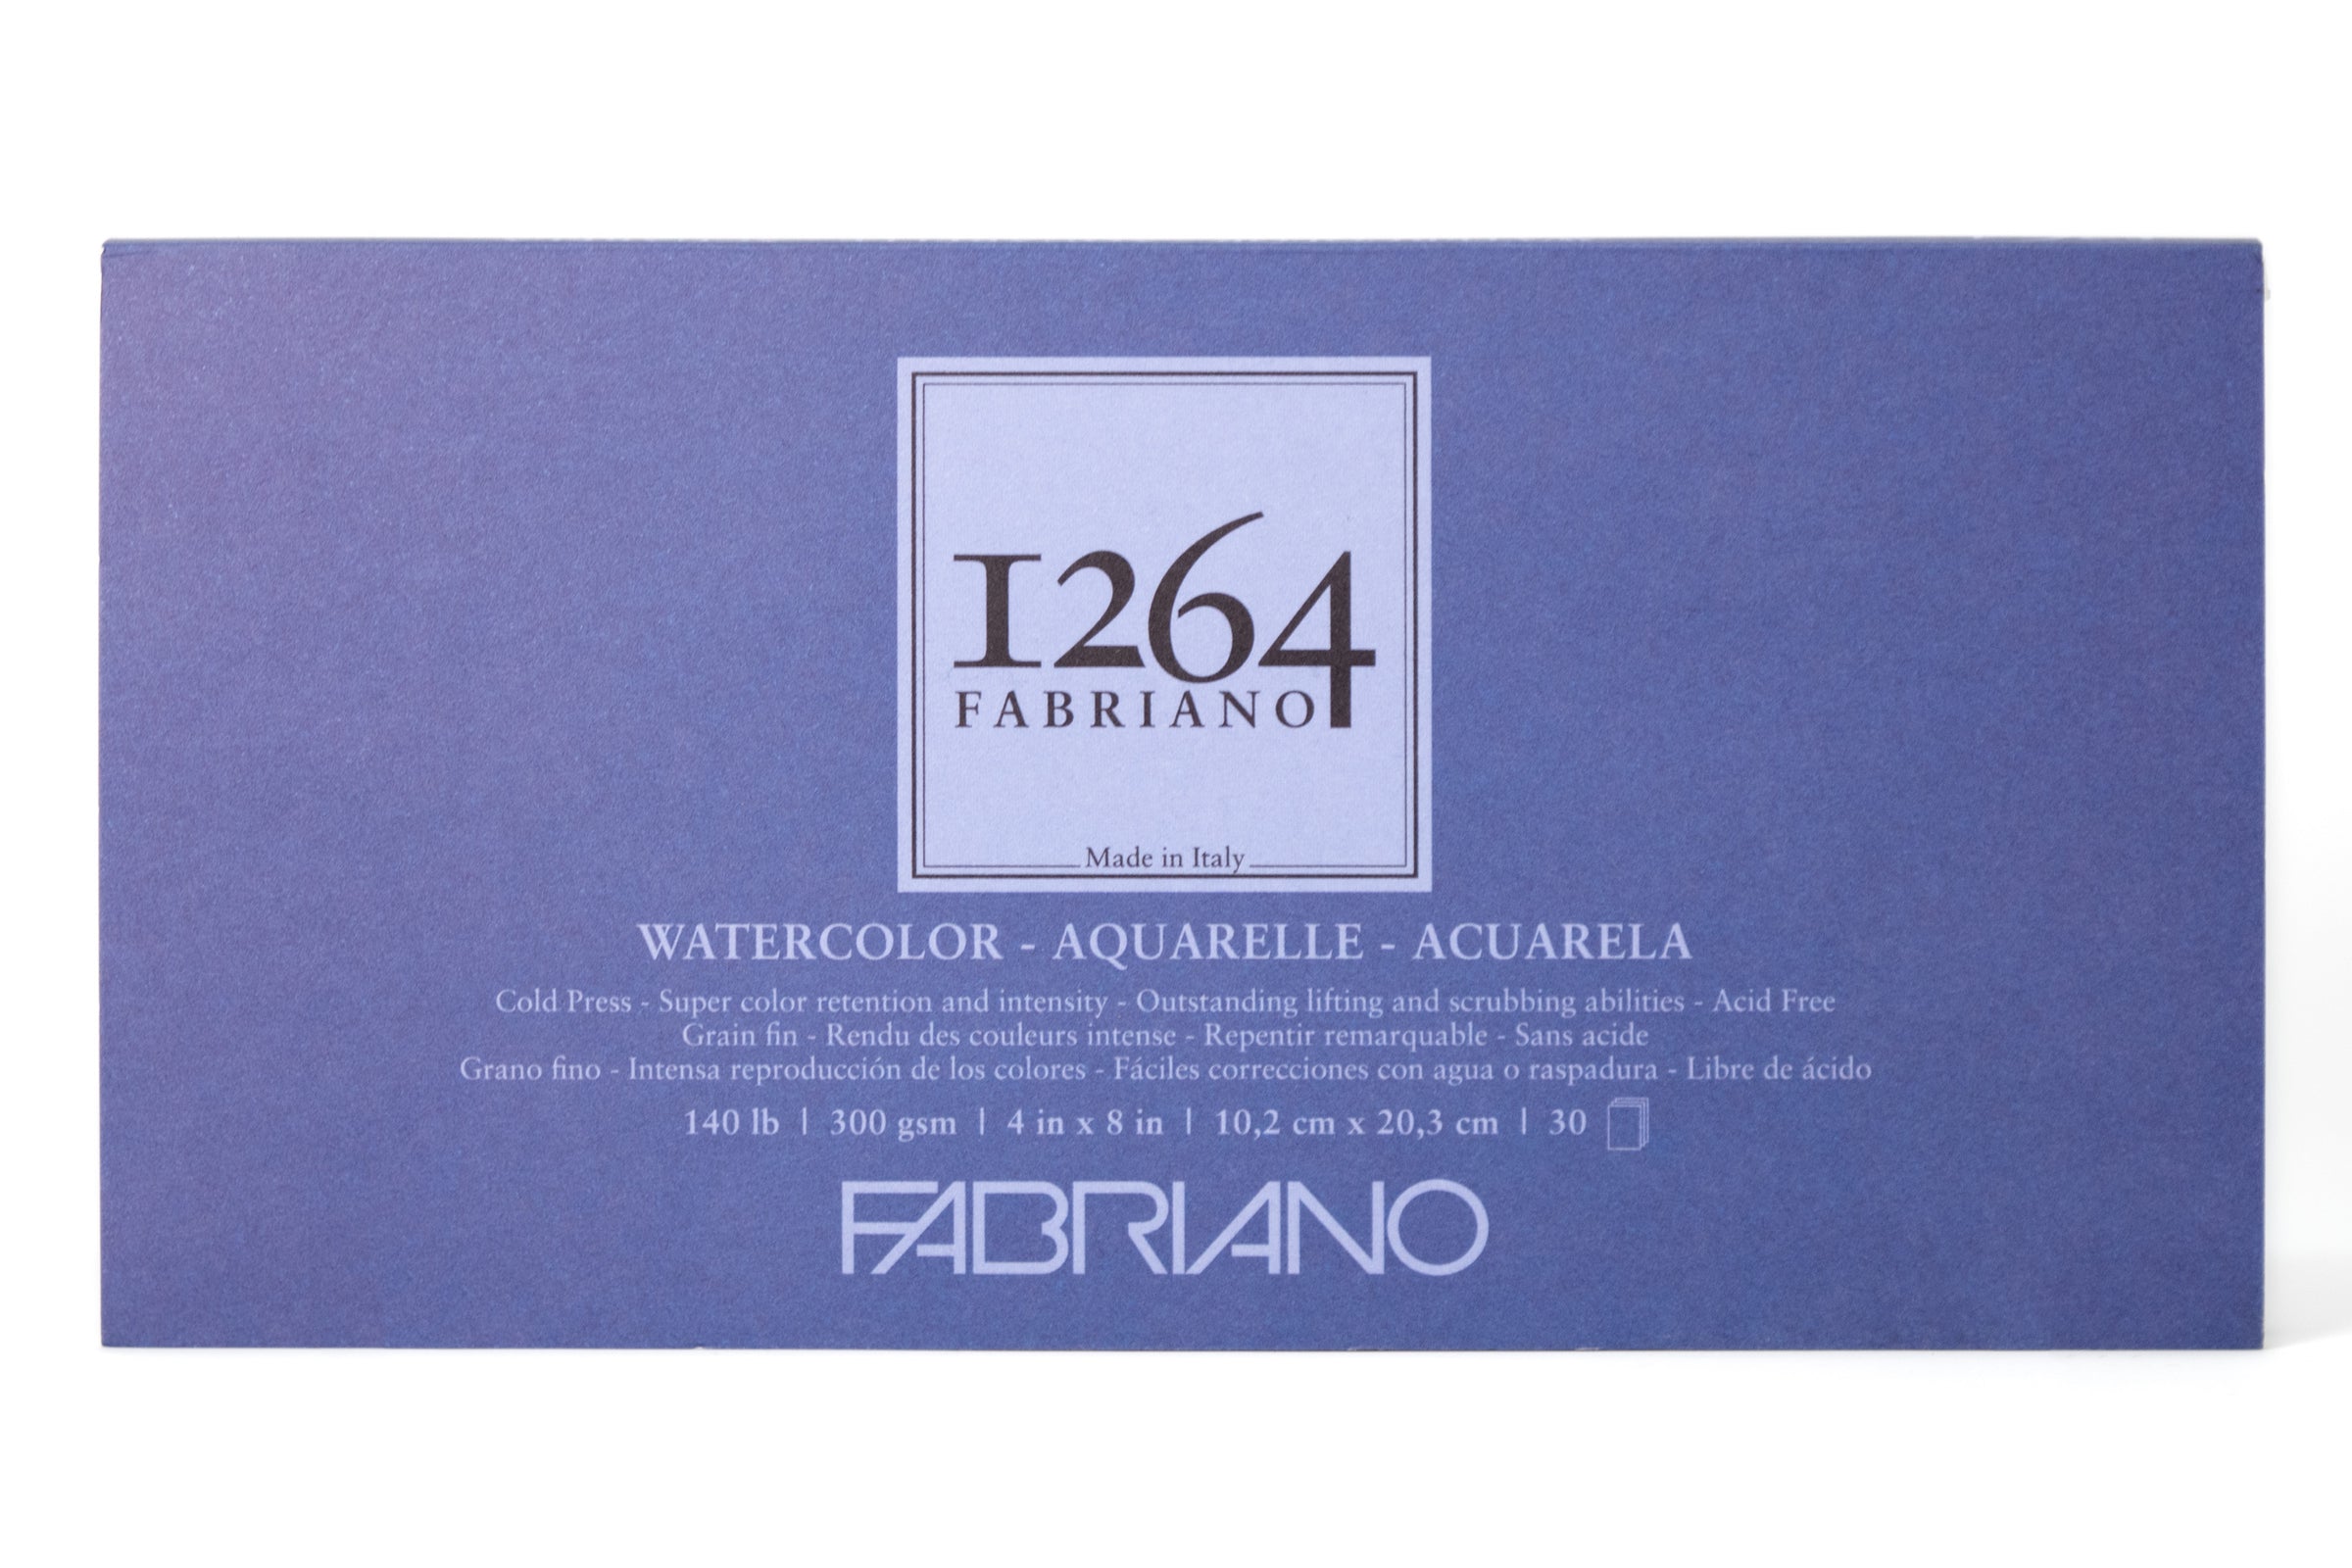 Fabriano 1264 Watercolor Pad, 9 inch x 12 inch, Spiral Bound